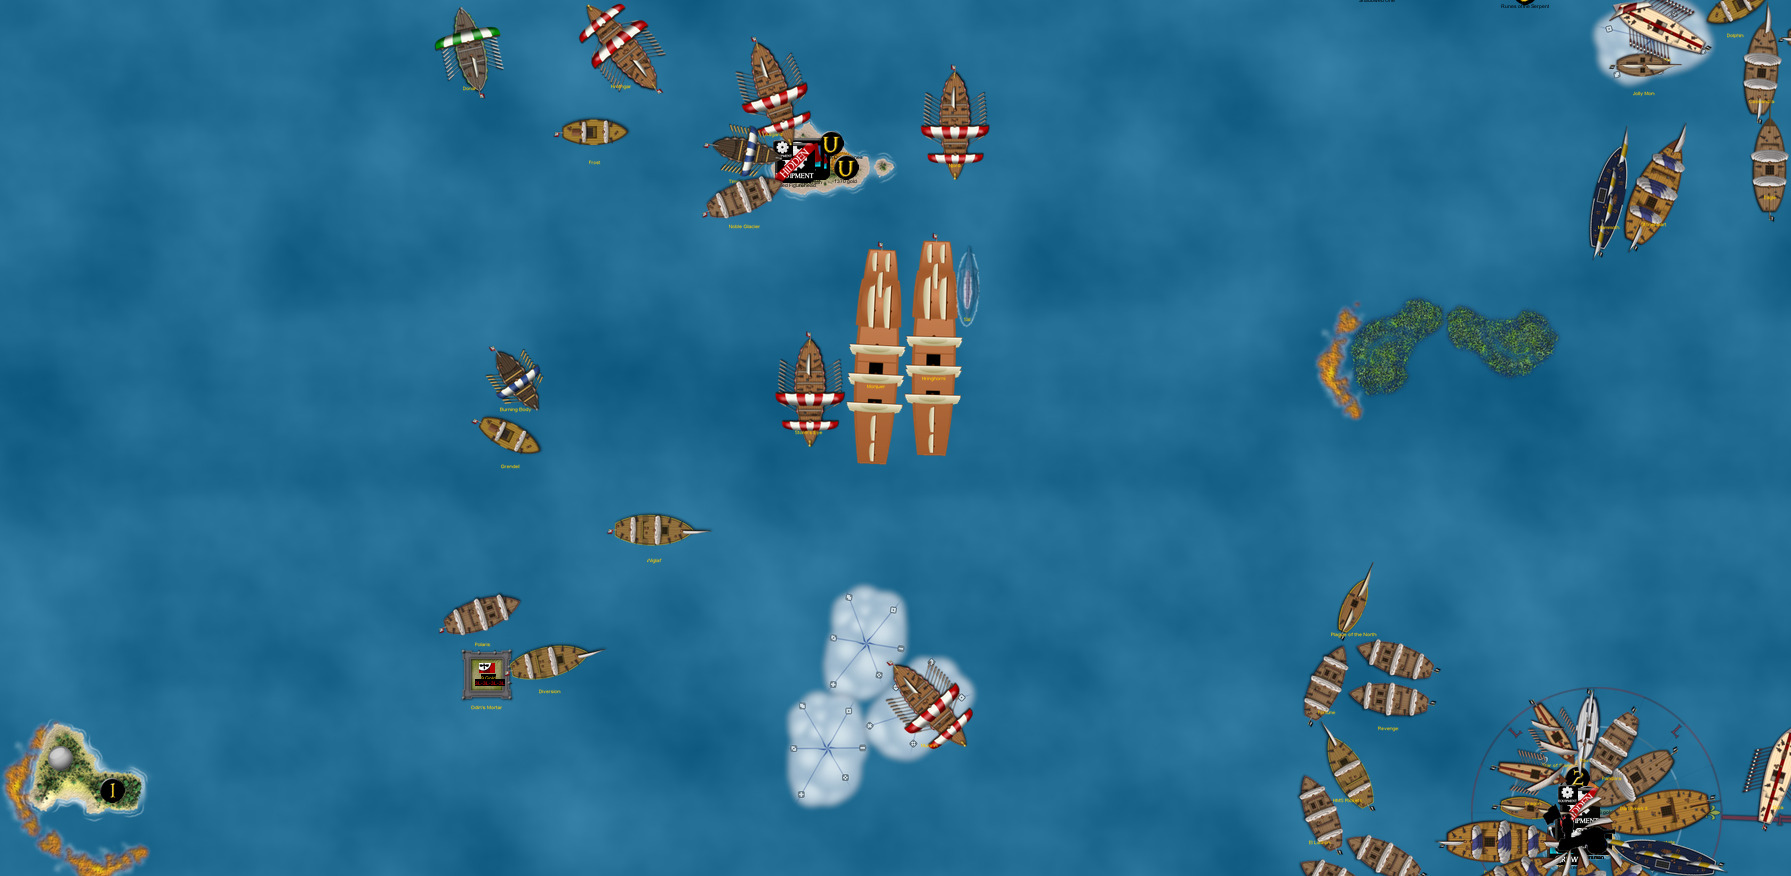 This picture shows most of the Viking ship movements.  Their recently launched warships are headed south towards a fog cluster, where the Muninn attempts to spy on Pirate movements to the east.  Some of their "lumber squadron" has broken off from their usual trade route to join up with the main force, as the Vikings anticipate needing all the ships they can spare in a possible battle with the Pirates - which they anticipate could be coming soon.  Even some resource runners are turning east, simply to beef up numbers and provide support as tugboats or block ships.  There is little need to run the lumber trade, with Hidden Troves providing a steady supply of gold from which to fund the fleet.